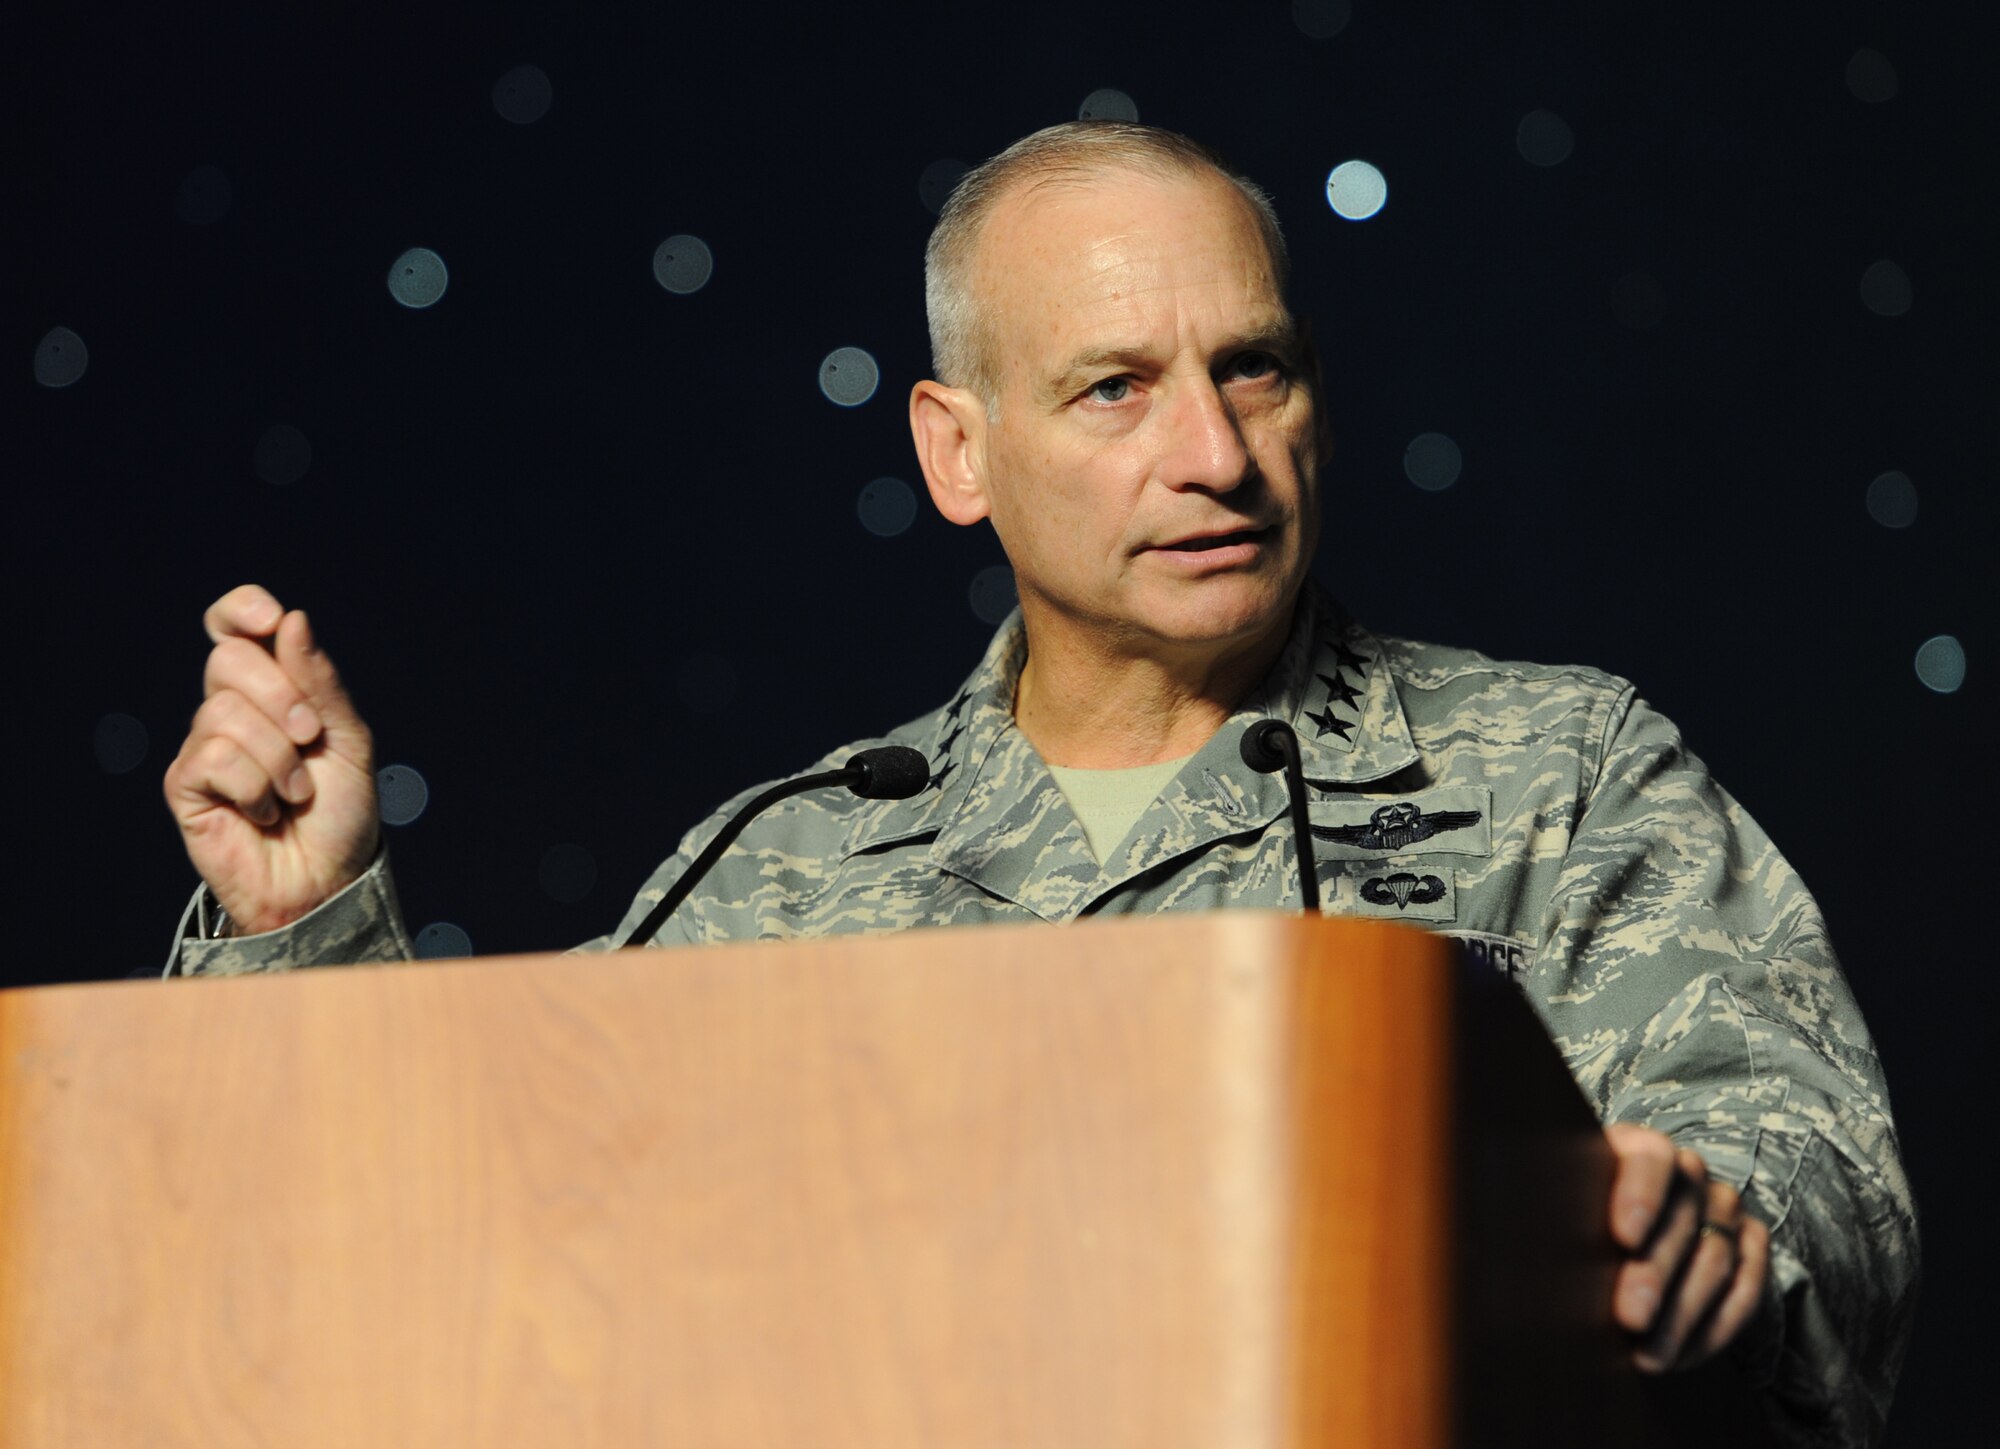 BARKSDALE AFB, La. - Lt. Gen. Jim Kowalski, Air Force Global Strike Command commander, provides opening remarks during the AFGSC Technology and Innovation Symposium Nov. 8. The symposium, co-hosted by the Cyber Innovation Center, is being held in conjuction with the Global Strike Challenge competition and is an opportunity to develop relationships and exchange ideas with Industry and Academia that support the command.   (U.S. Air Force photo by Master Sgt. Corey A. Clements)